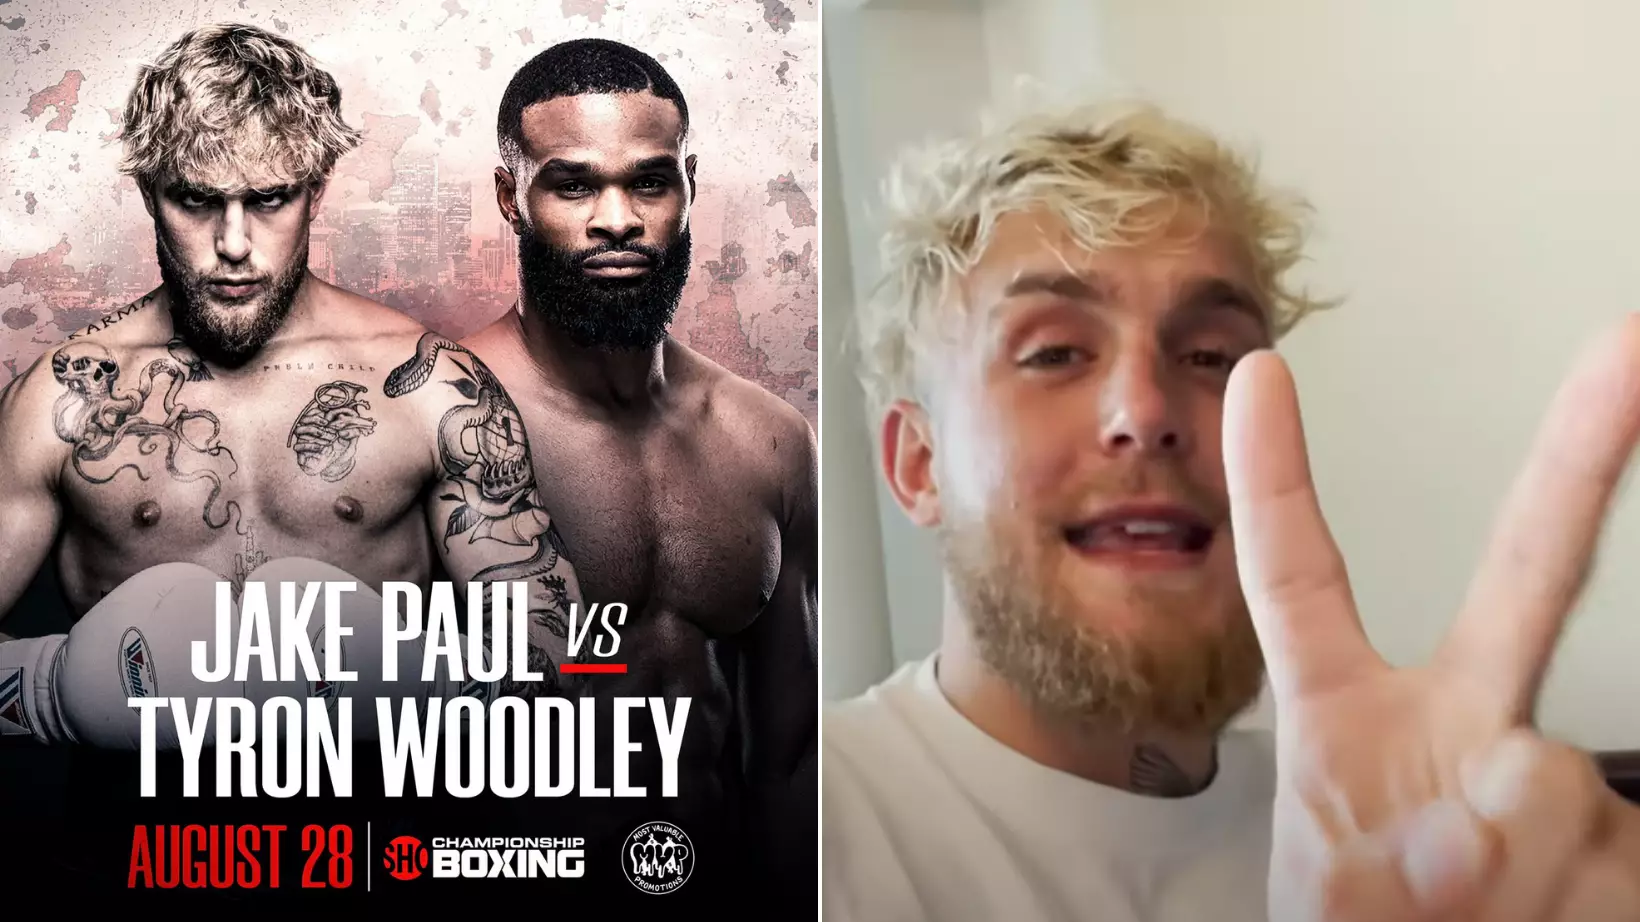 Jake Paul Savagely Taunts Tyron Woodley And Makes Prediction In Announcement Post